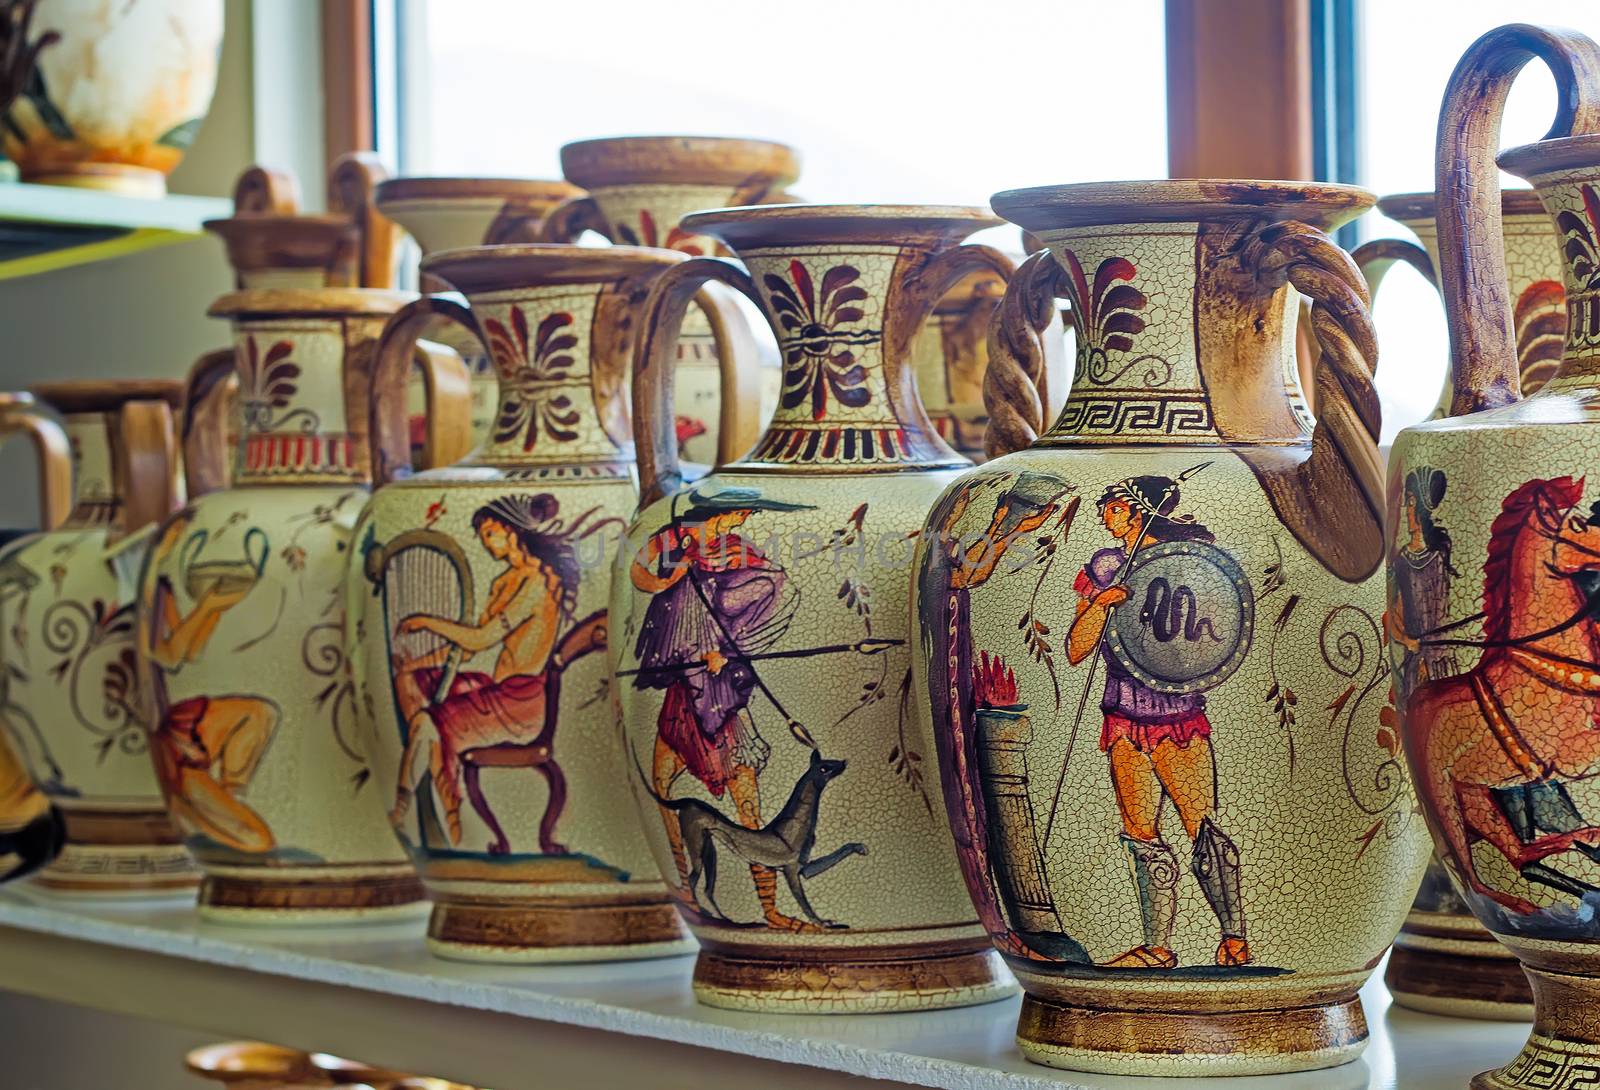 On the shelf in the store are beautiful ceramic vases with painted antique subjects.